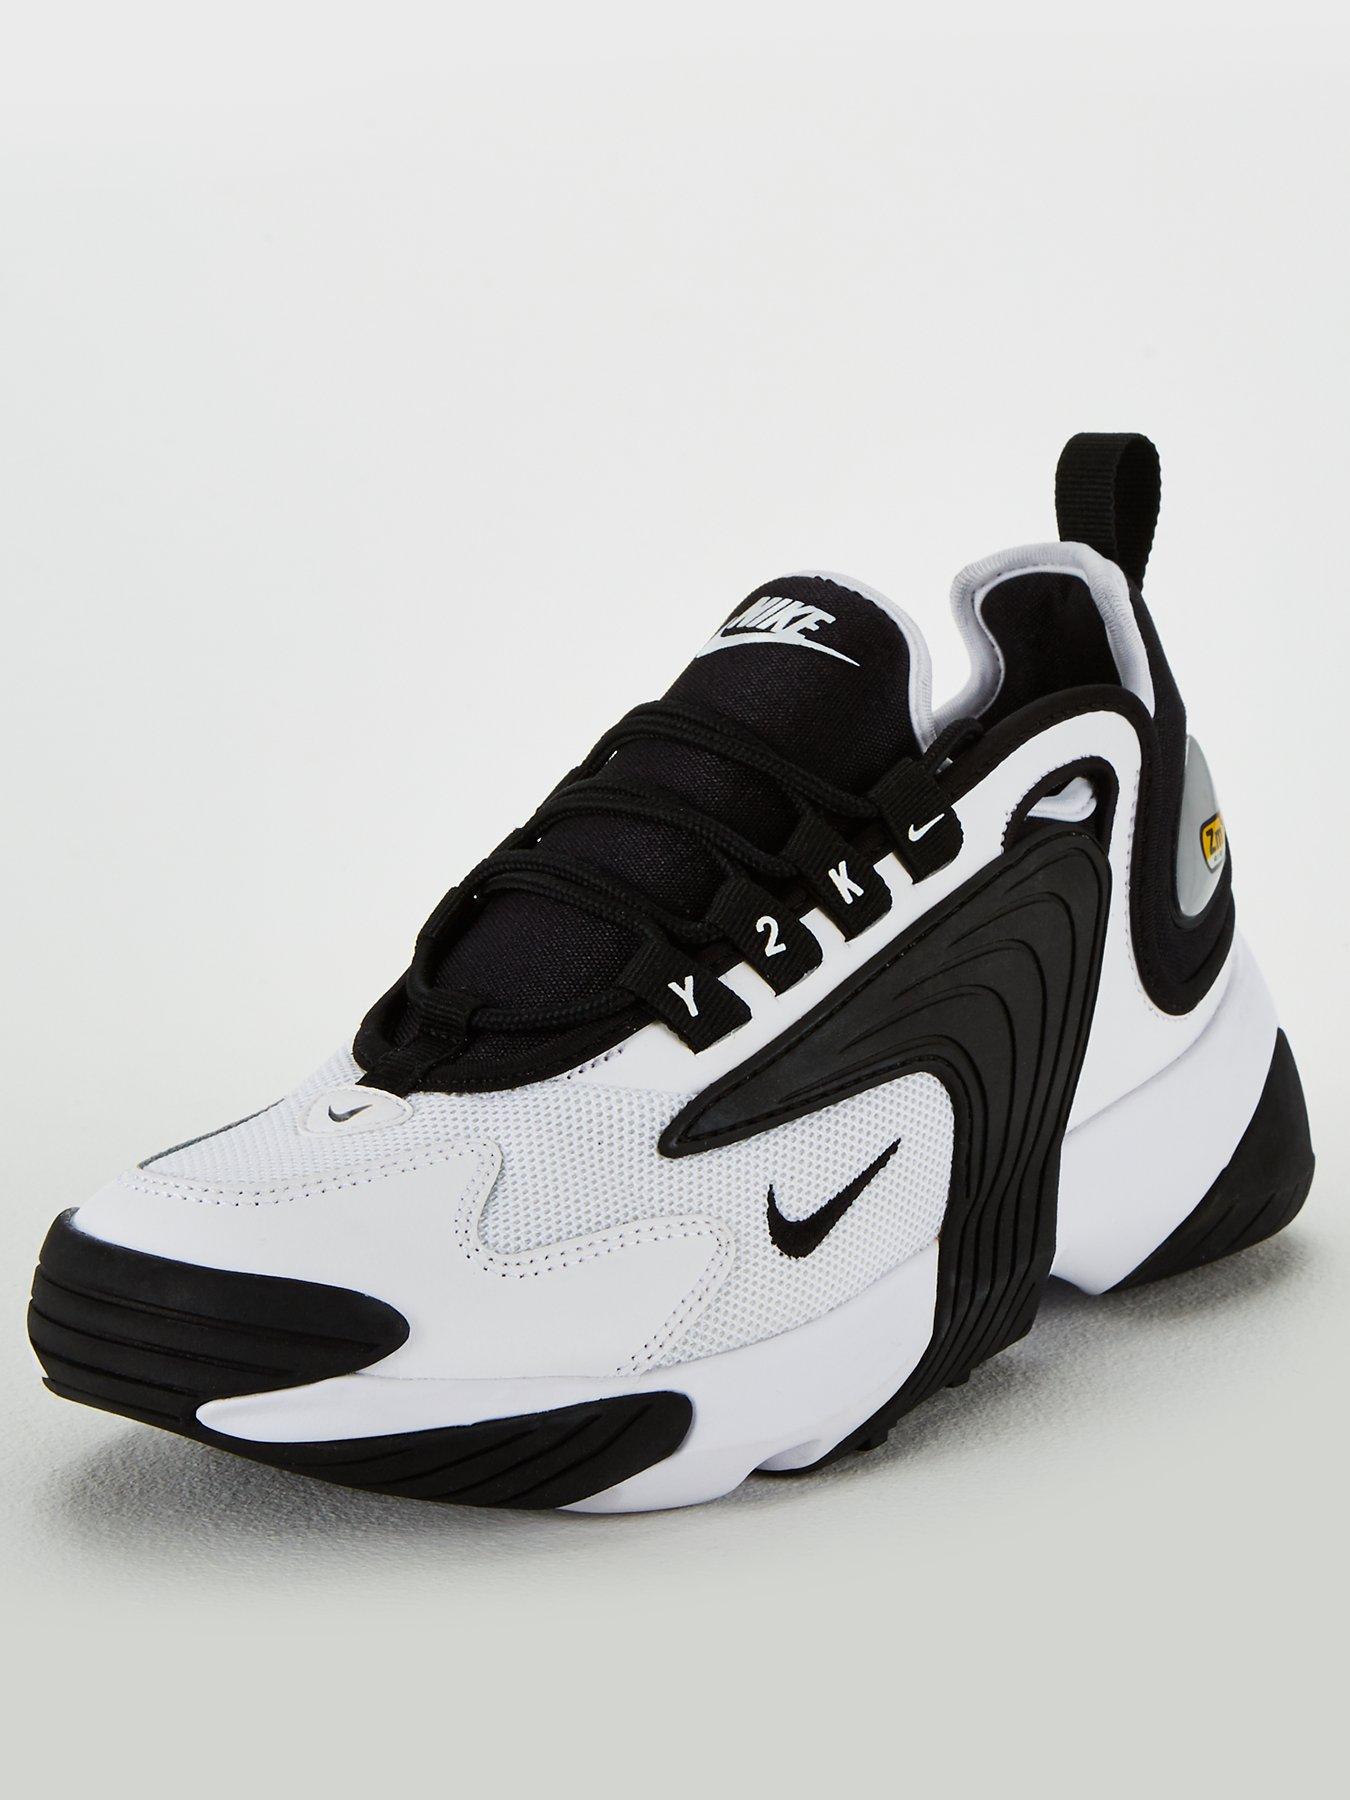 white and black zooms